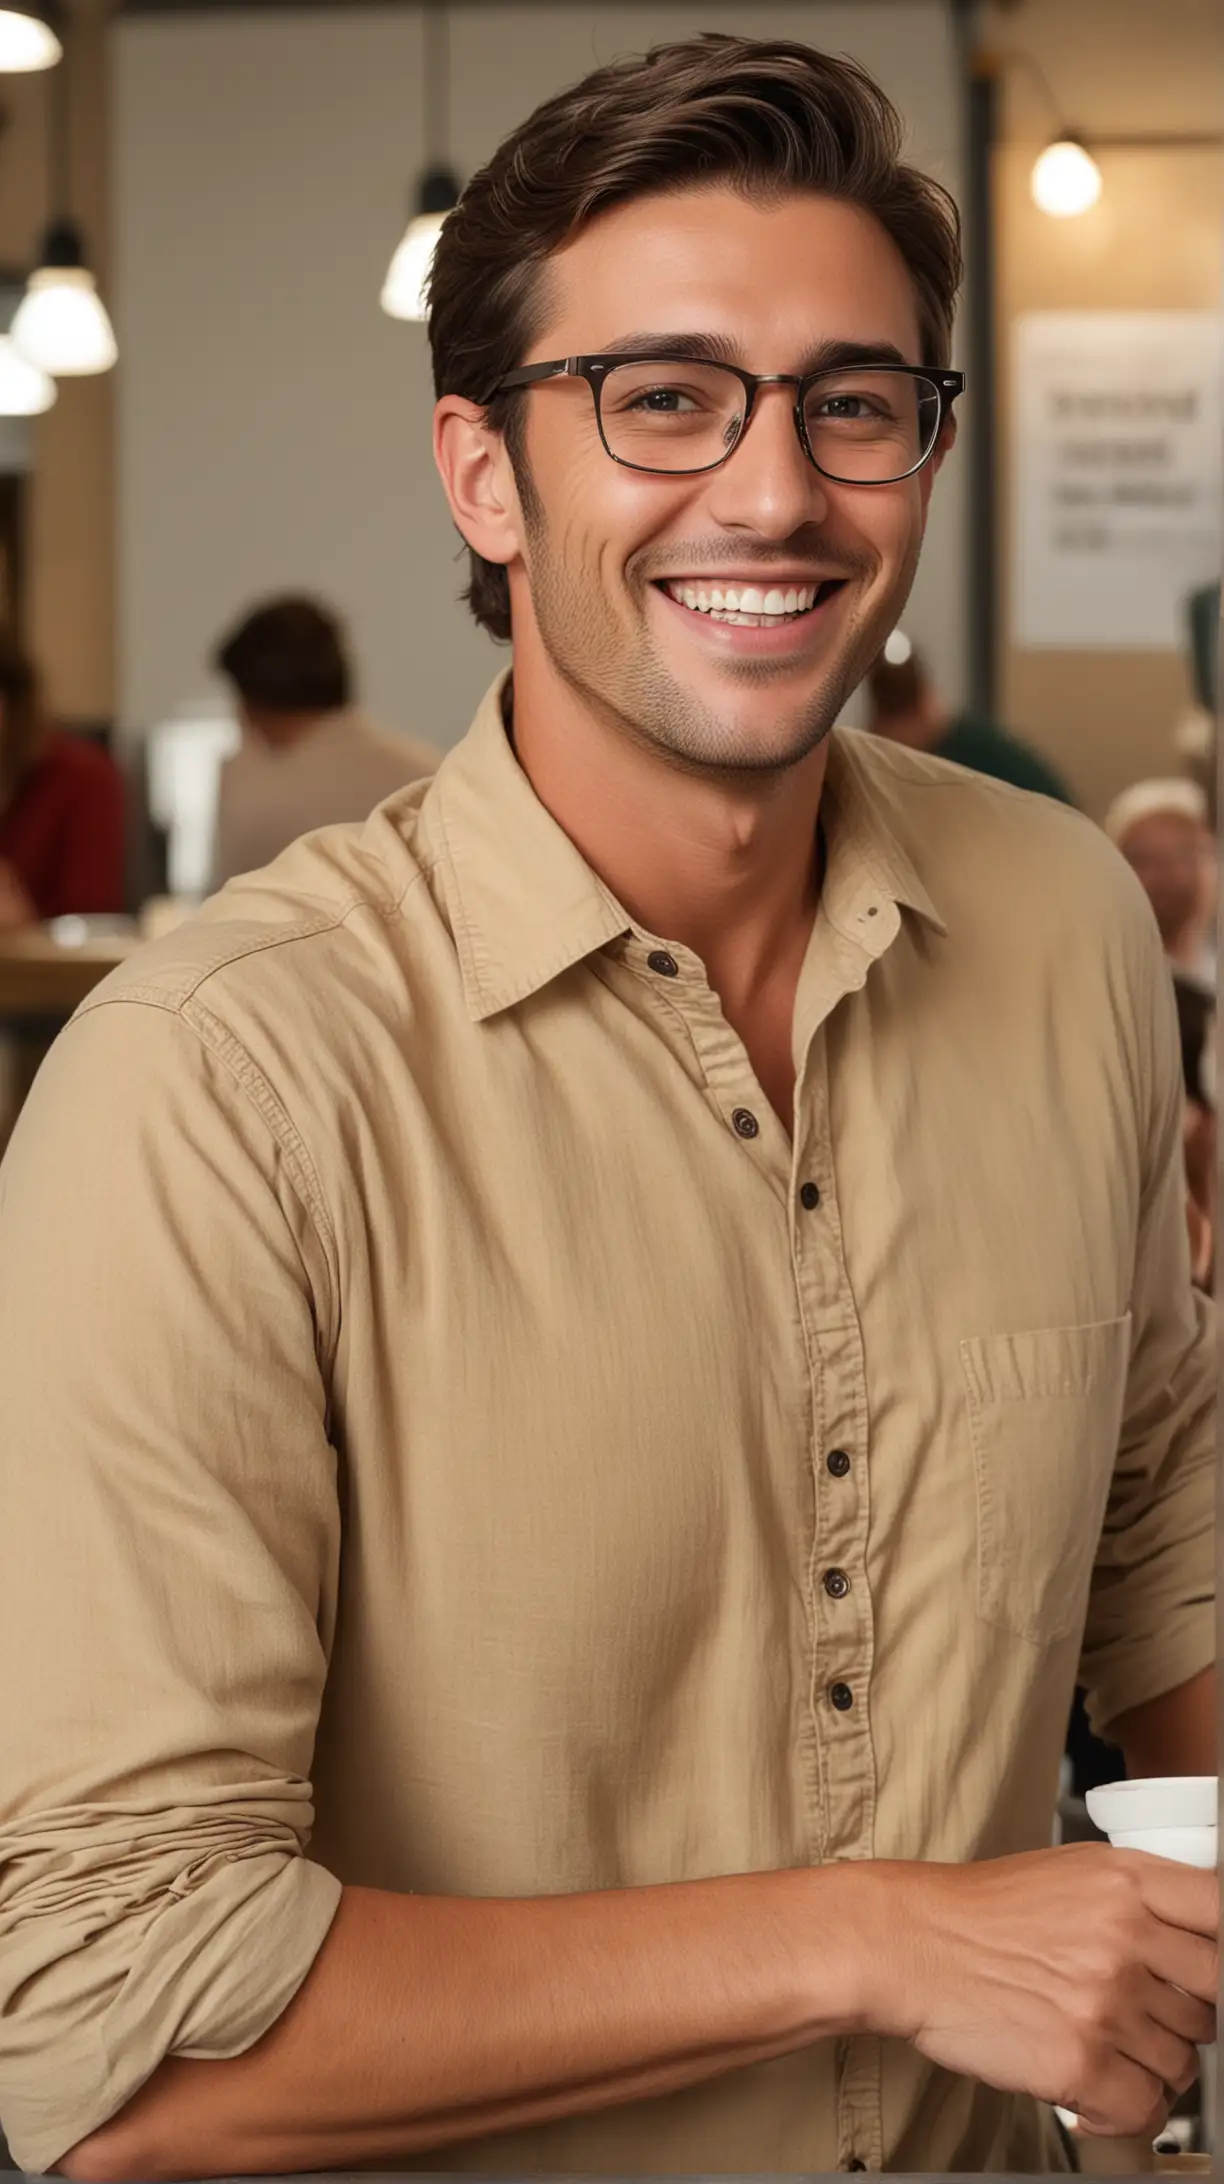 Smiling Man with Brown Hair and Glasses Speaking at Cafe